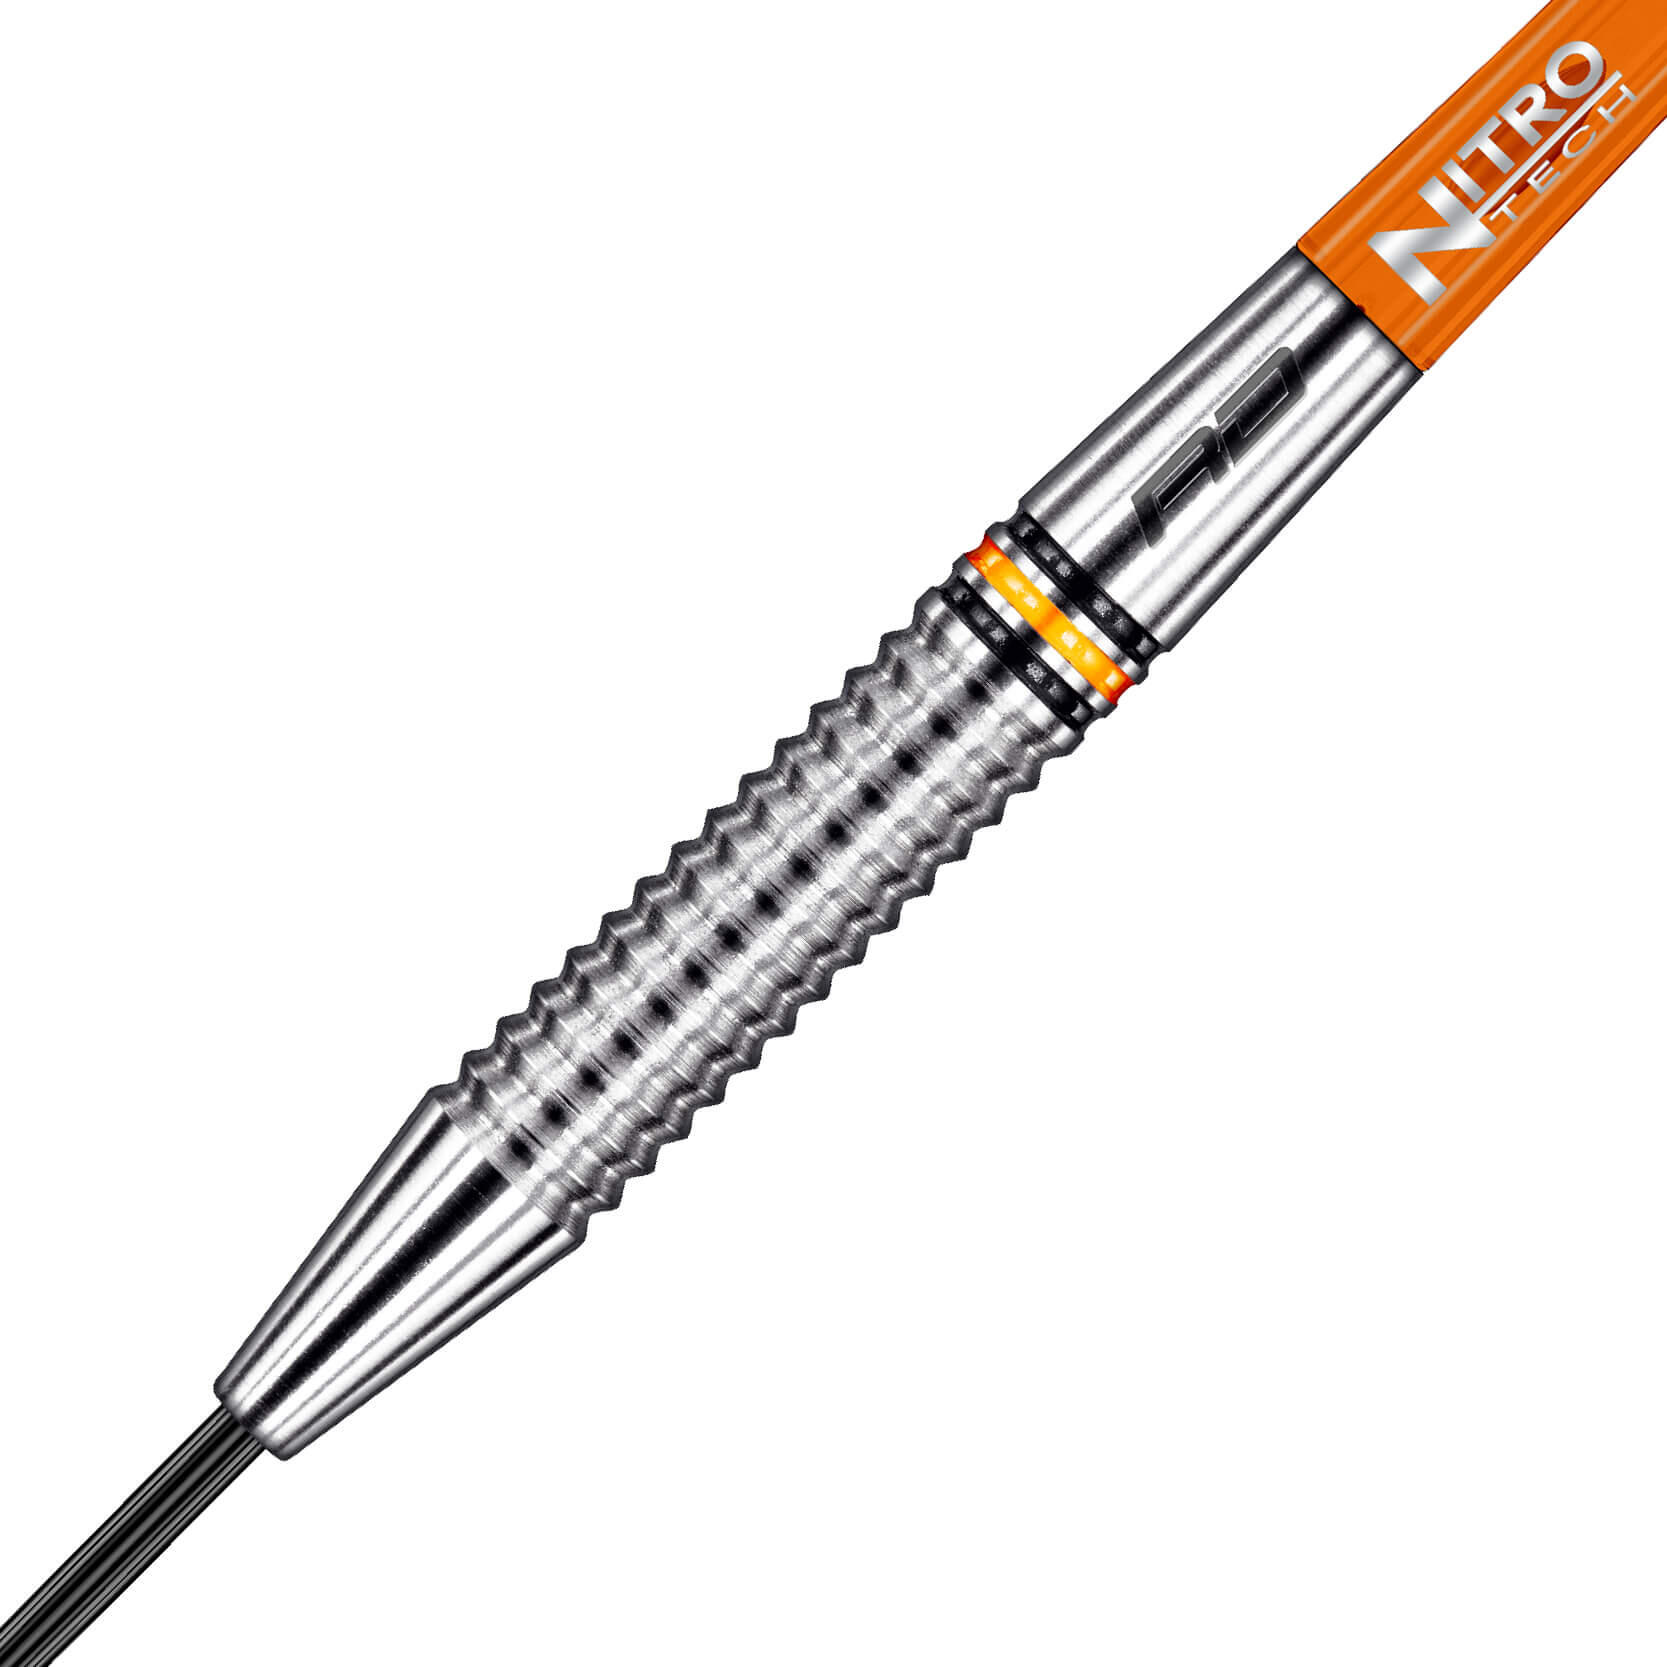 Amberjack 17: 26g Tungsten Darts Set with Flights and Stems 3/5